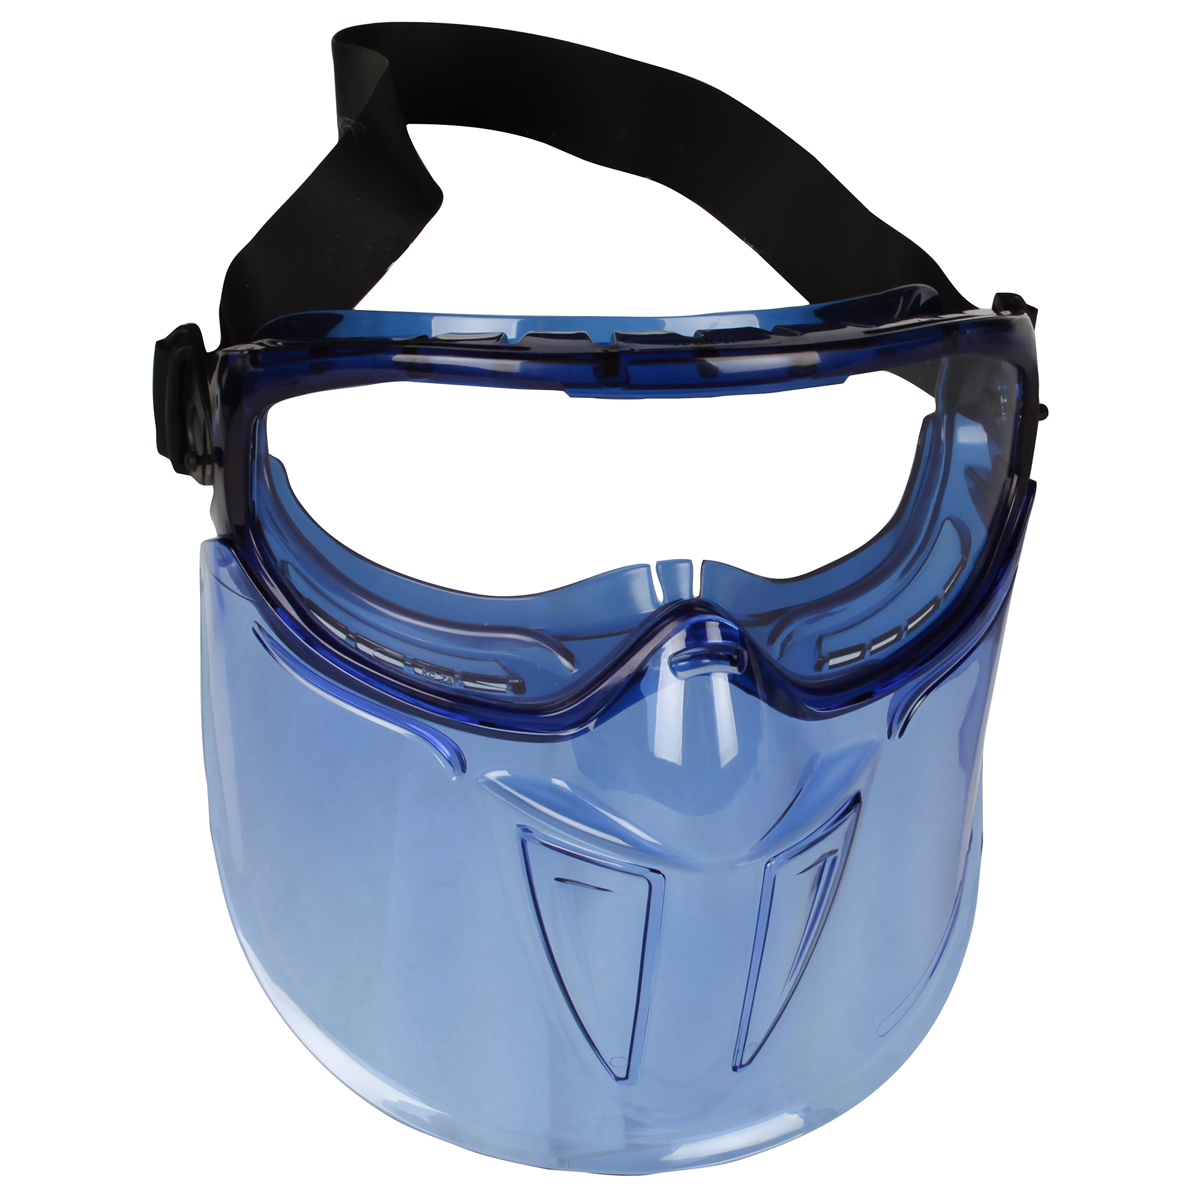 Airgas - K4518629 - Kimberly-Clark Monogoggle™ Anti-Fog Blue Splash Goggles Frame Shield And Lens XTR With Professional Clear KleenGuard™